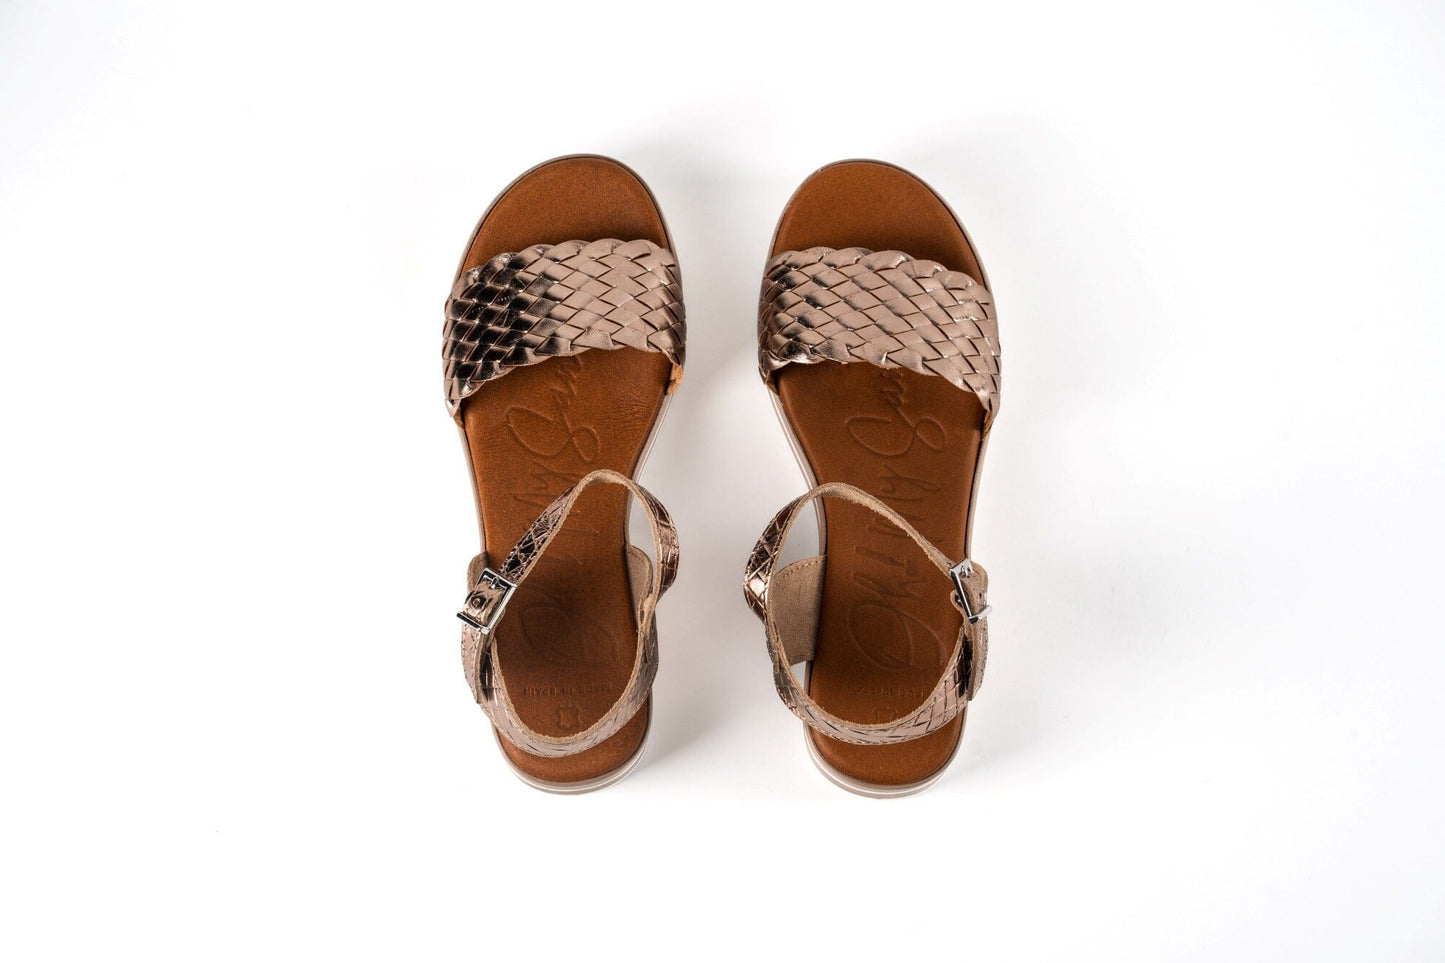 5276TB Spanish leather woven sandals/wedge in Gold sandals Sam Star Shoes 